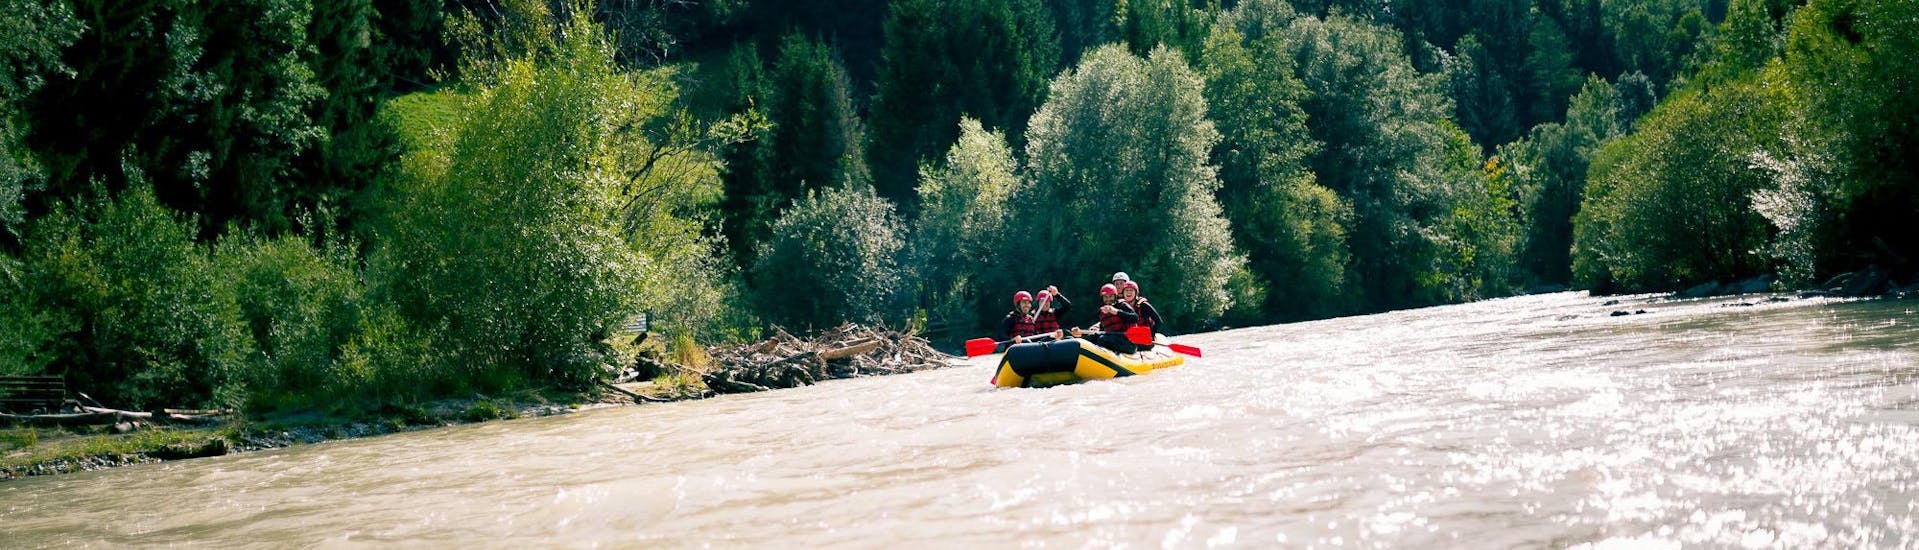 During Rafting on the Enns River in Schladming with myadventure Schladming.